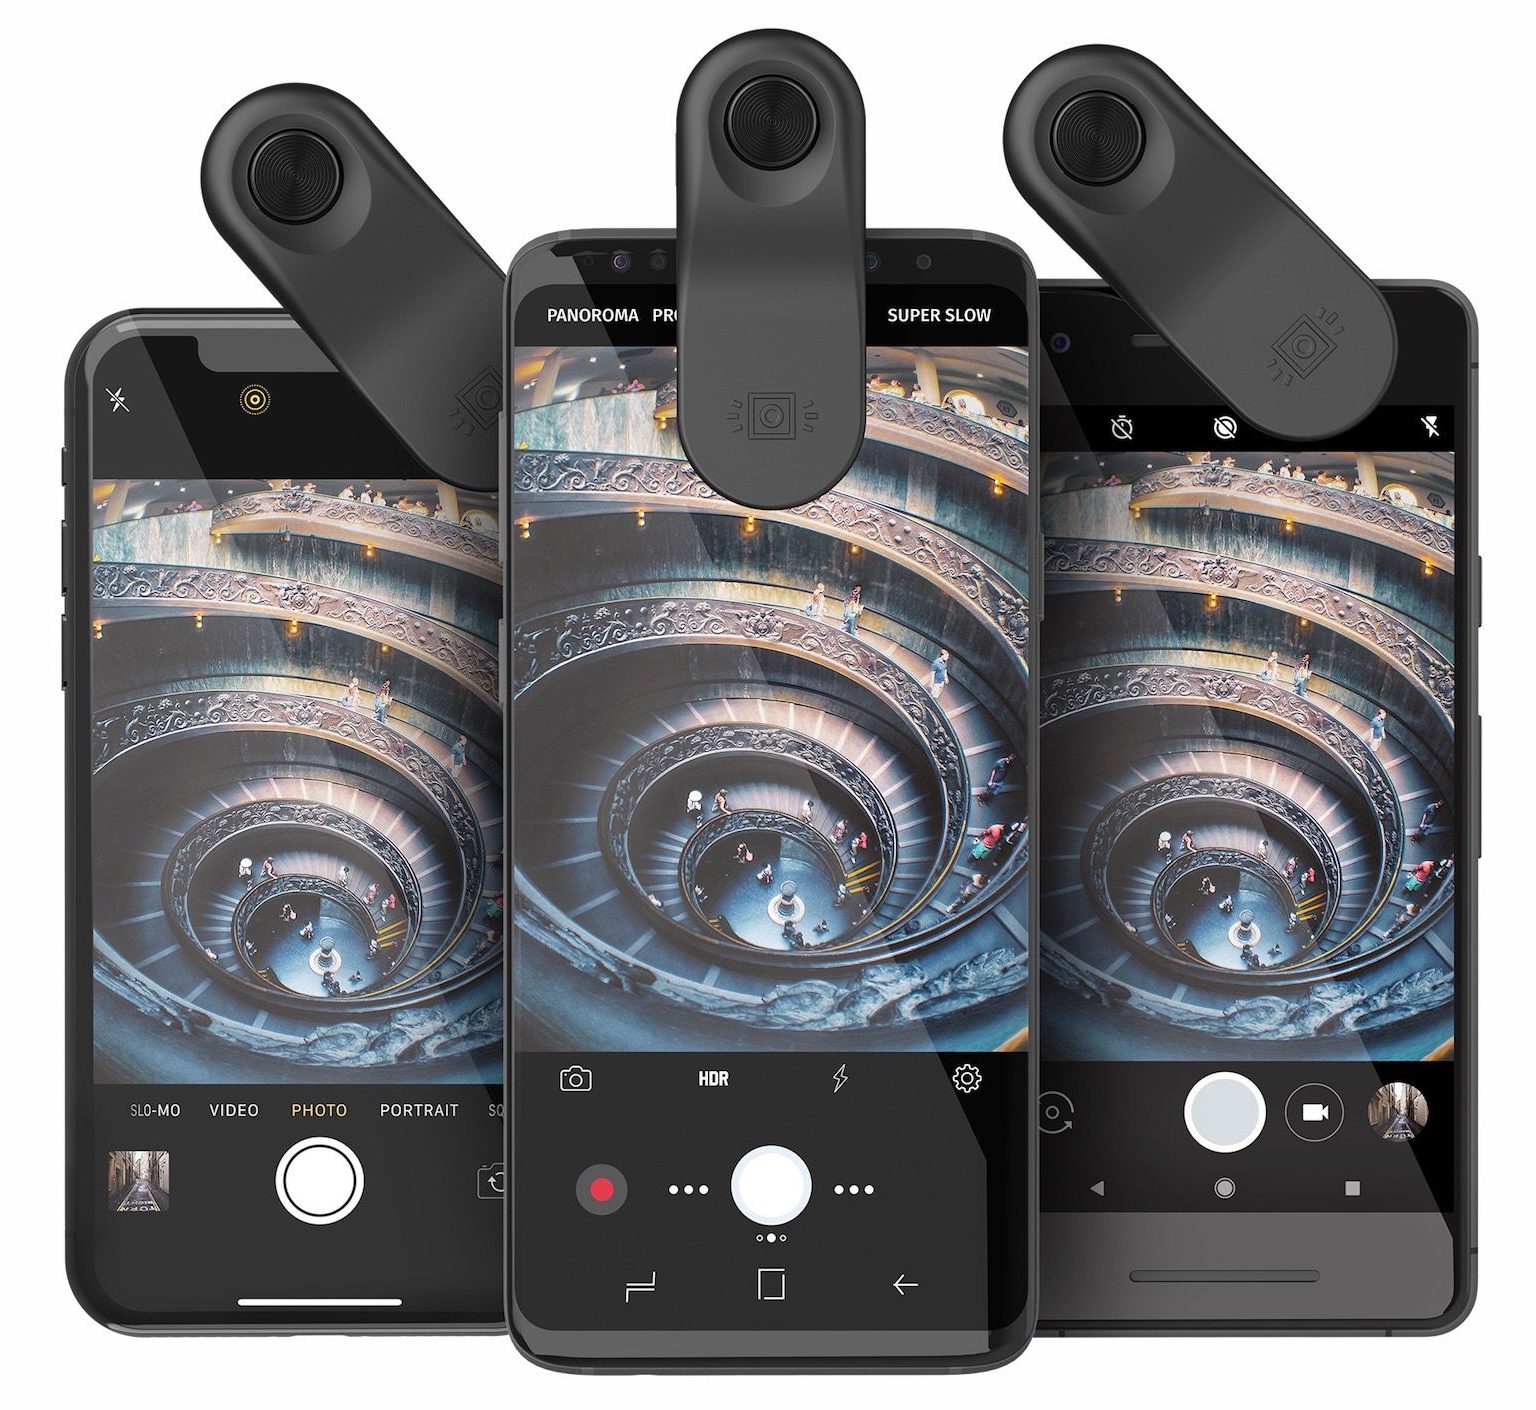 New olloclip accessory allows use of special lenses in various devices